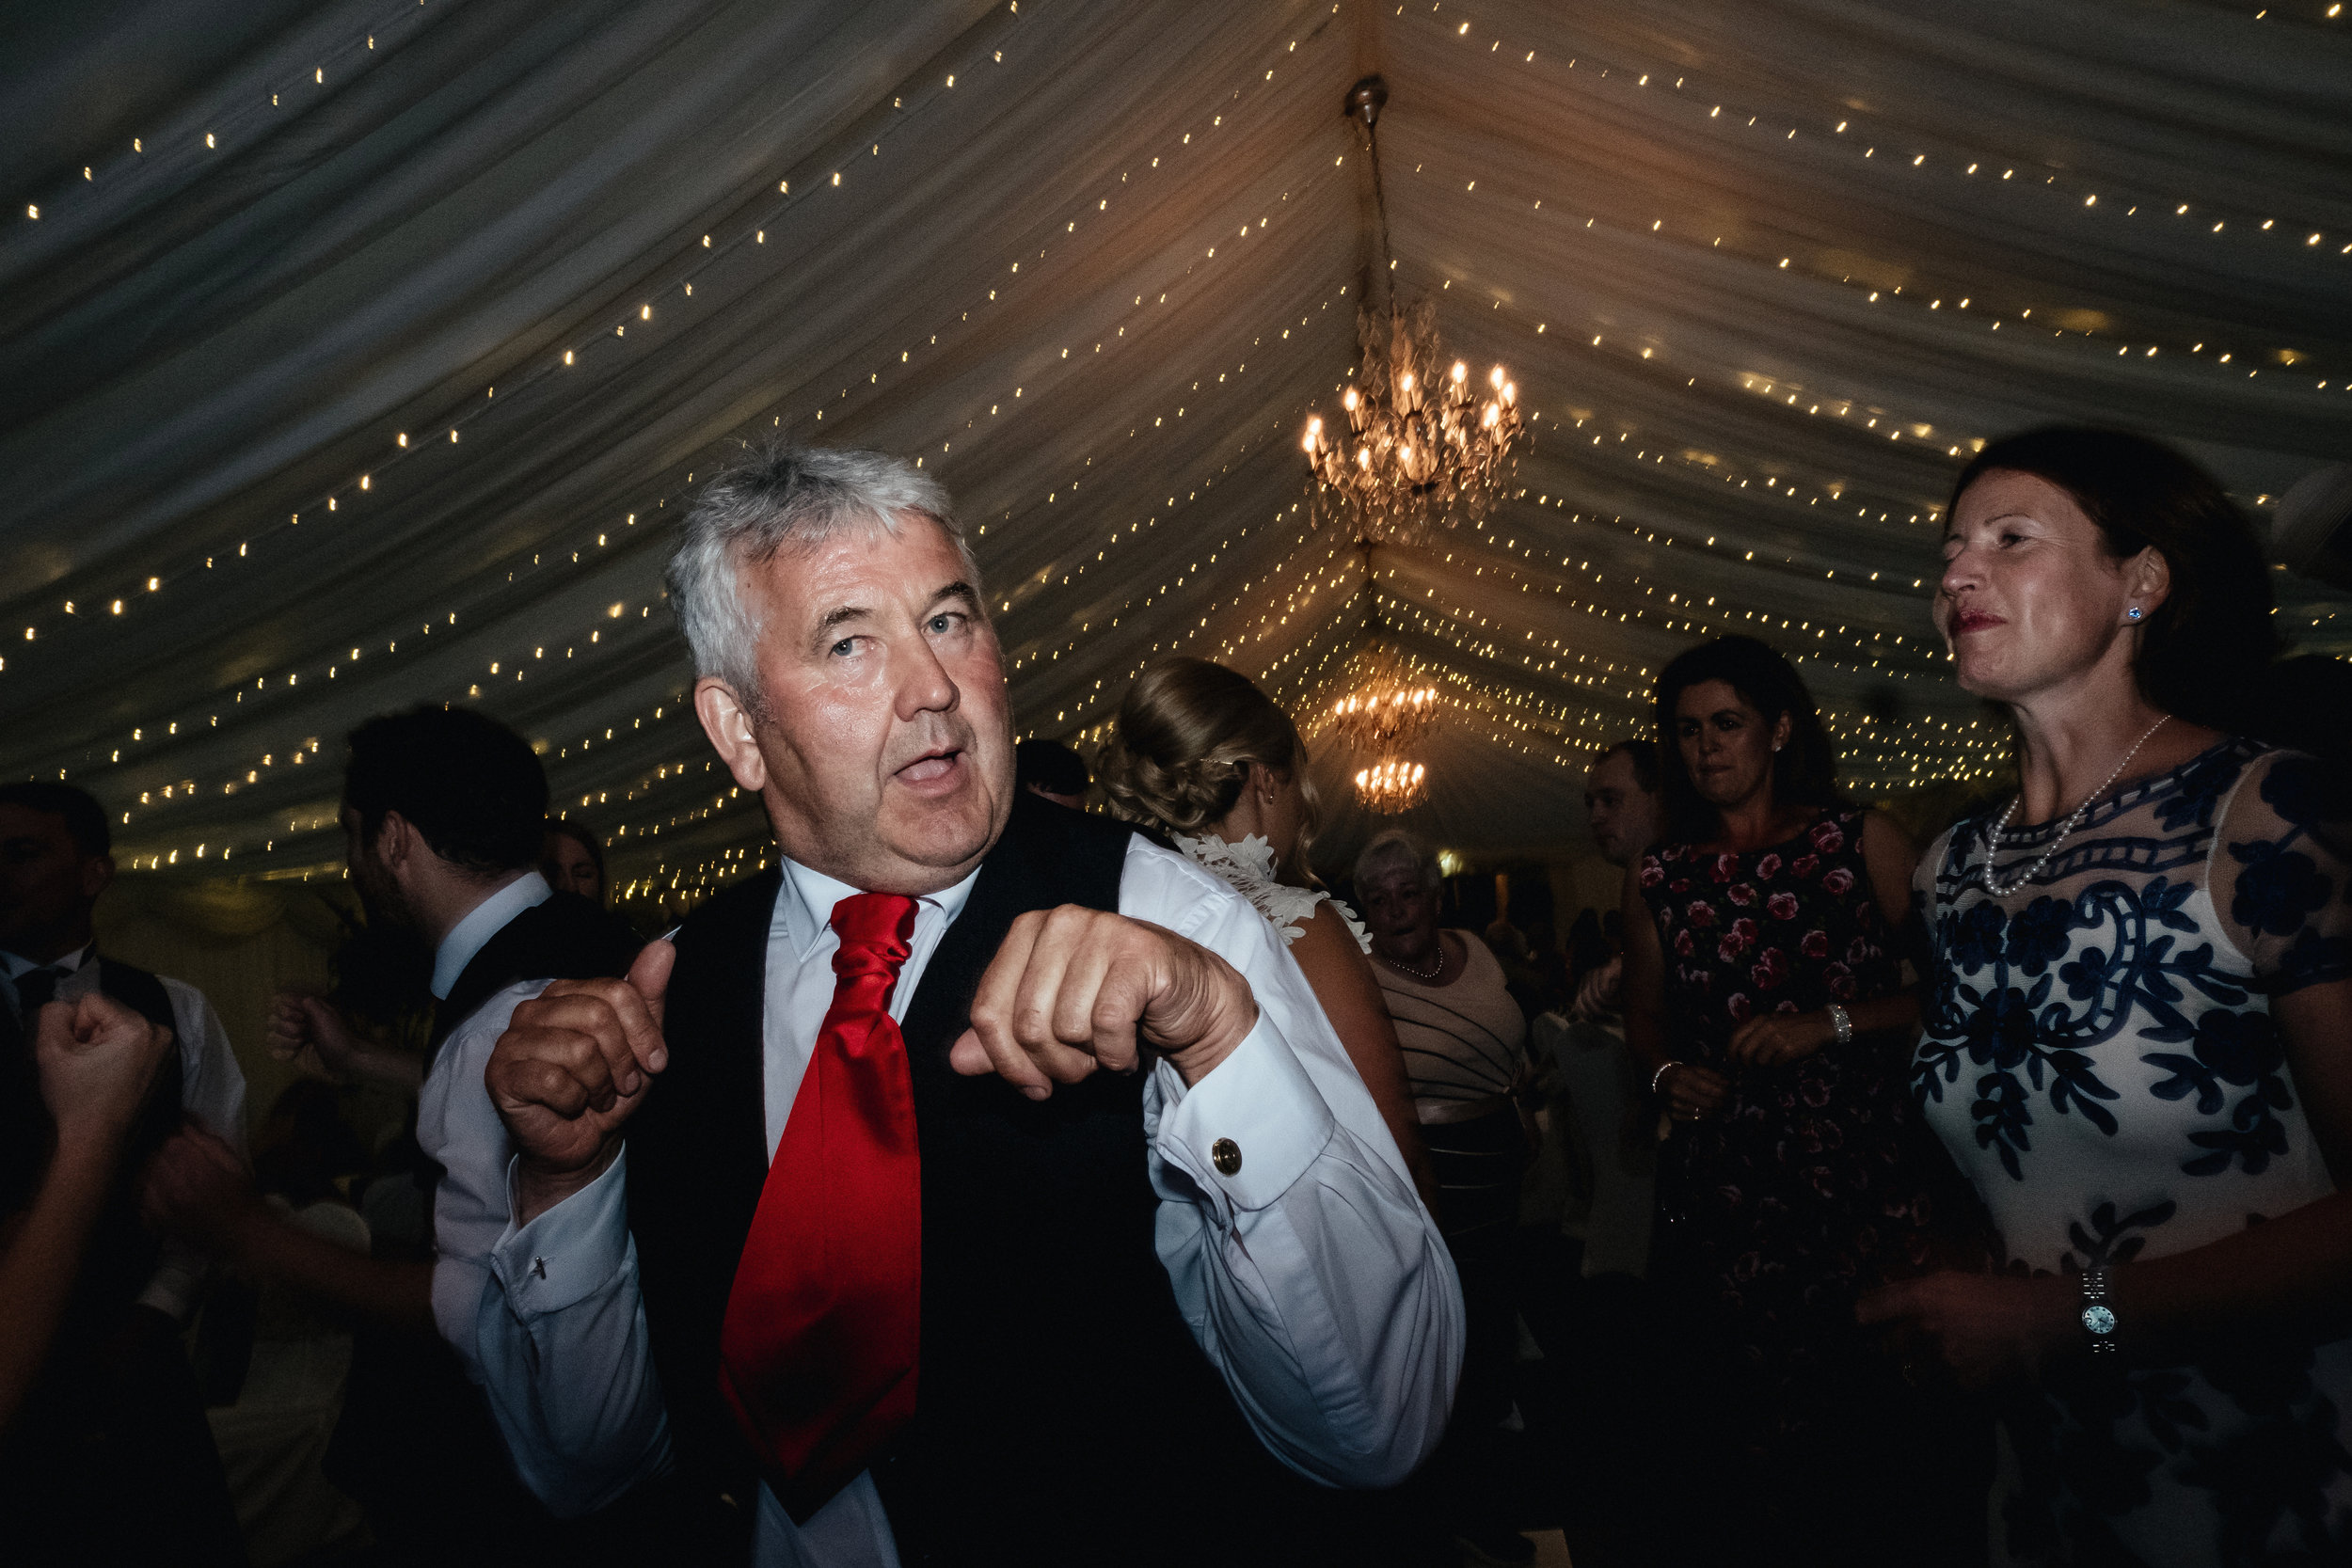 Father of the groom dancing